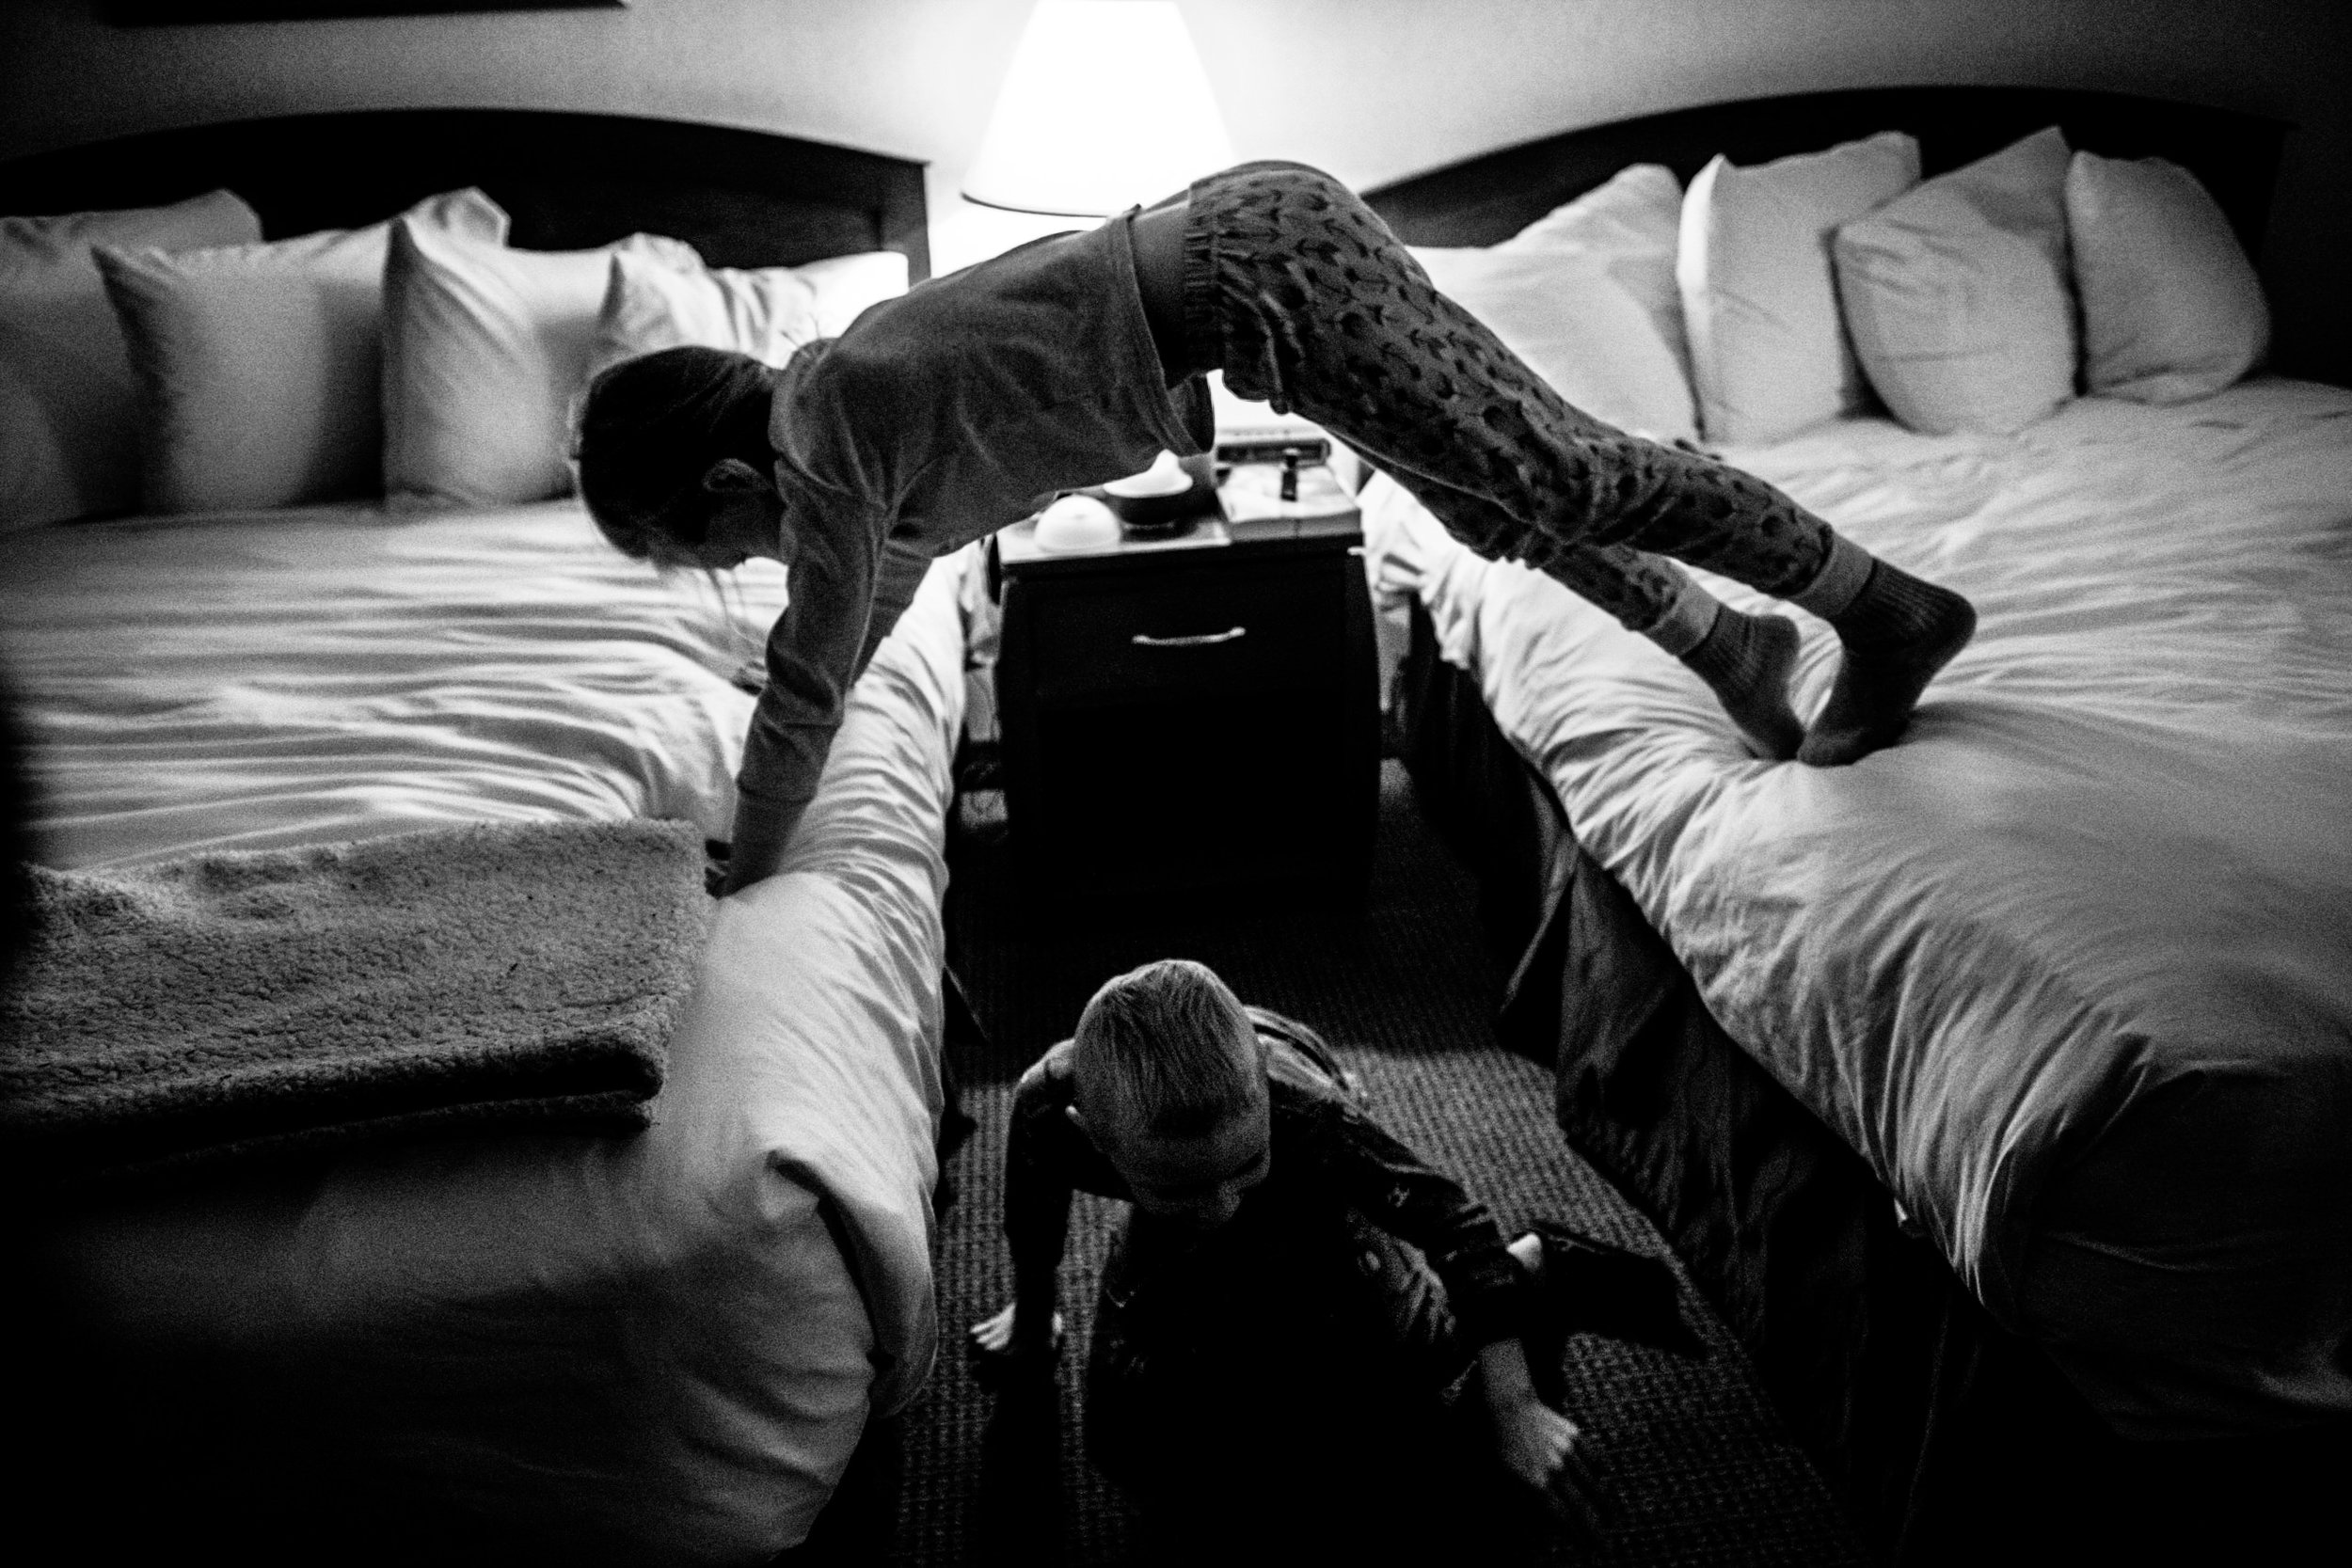 kids in hotel room playing on beds making a bridge with one child crawling under